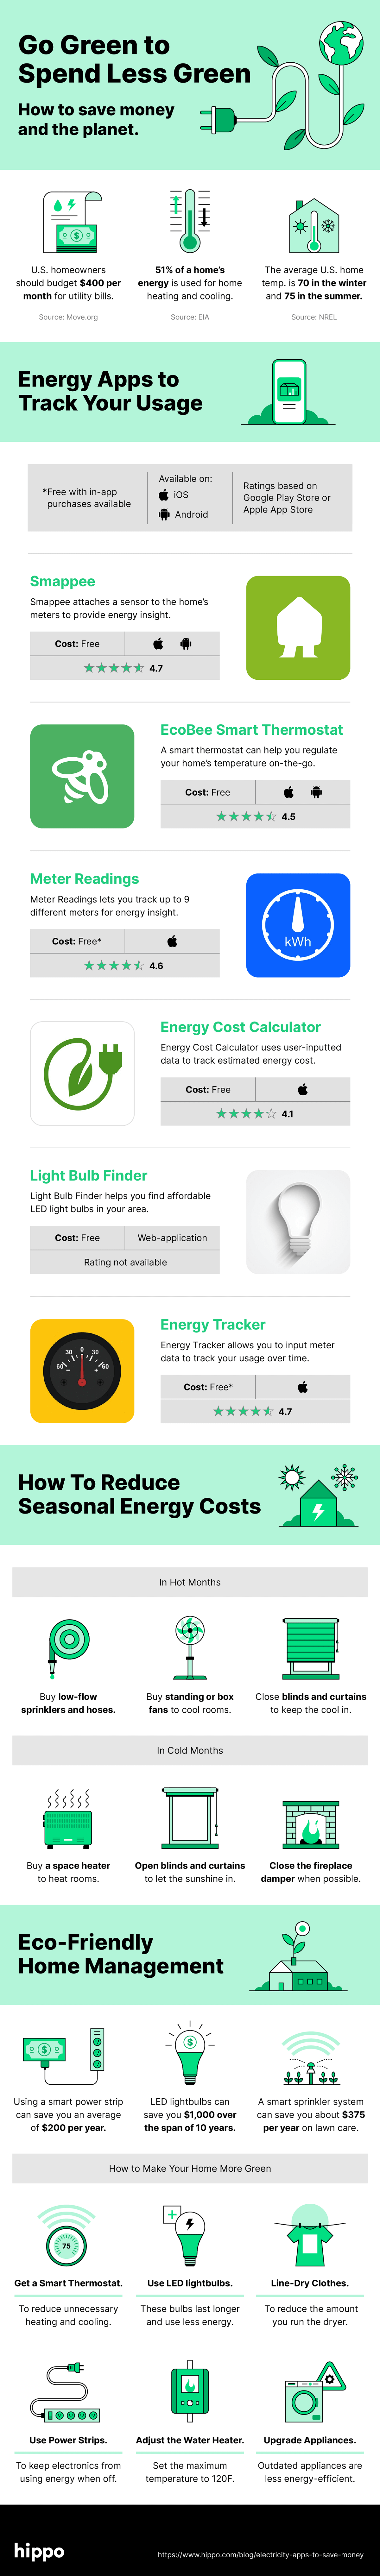 Go Green To Spend Less Green infographic